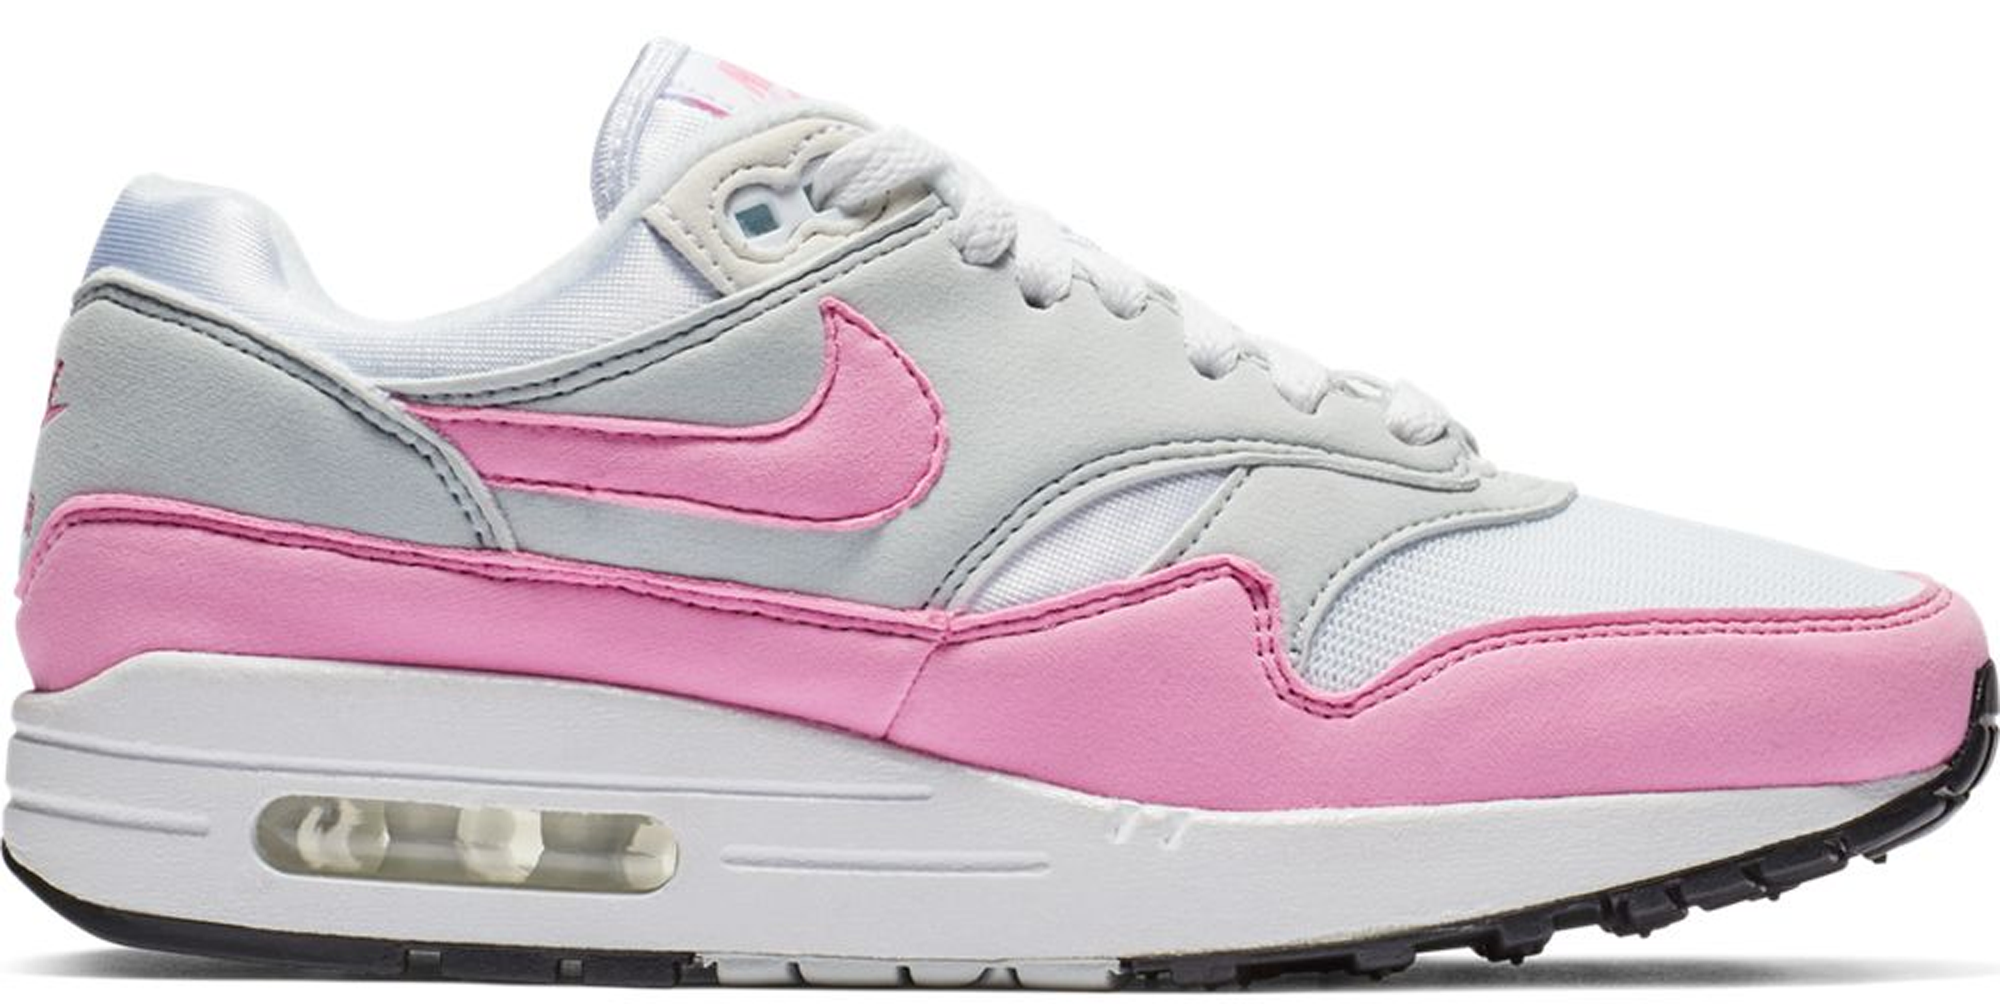 pink and white air max 1